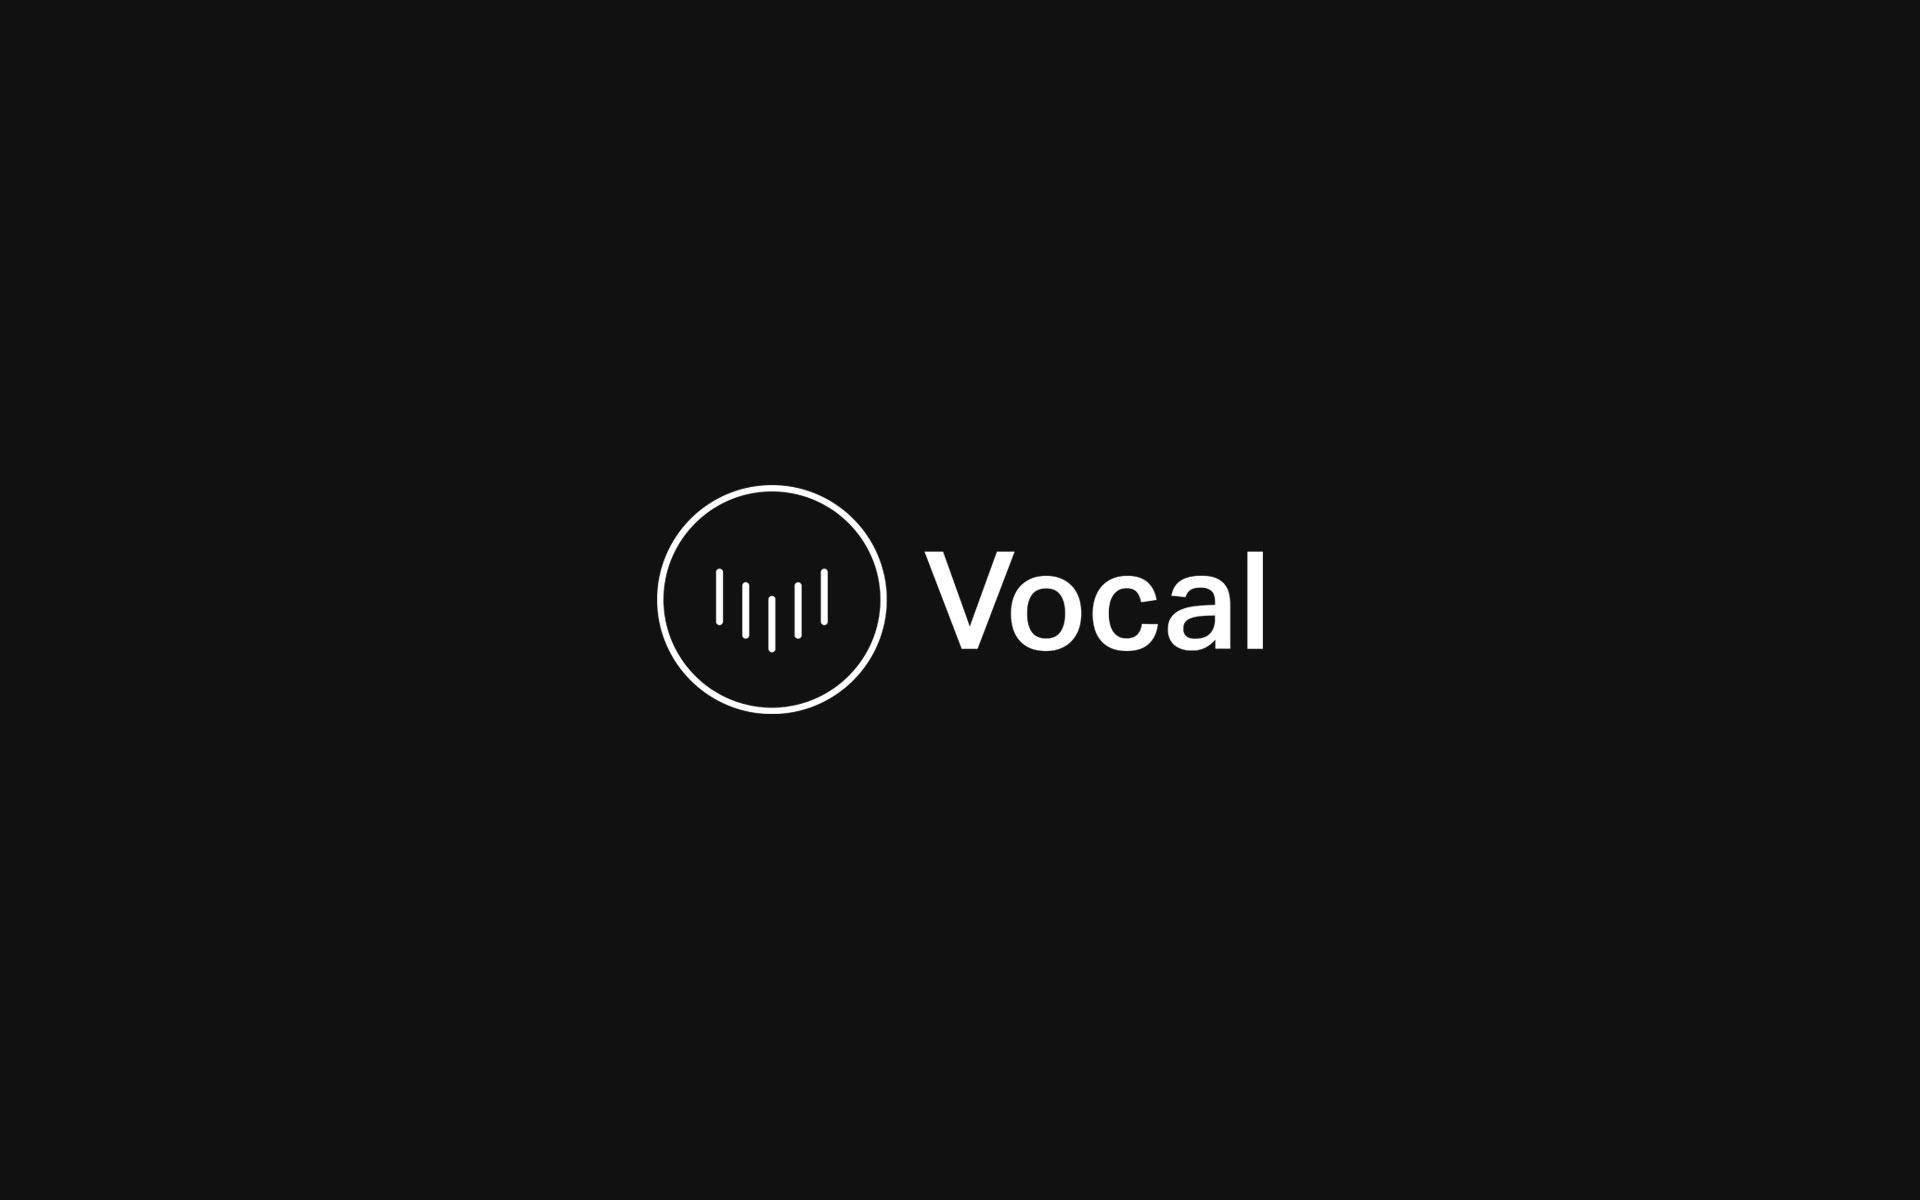 Edit your story on Vocal